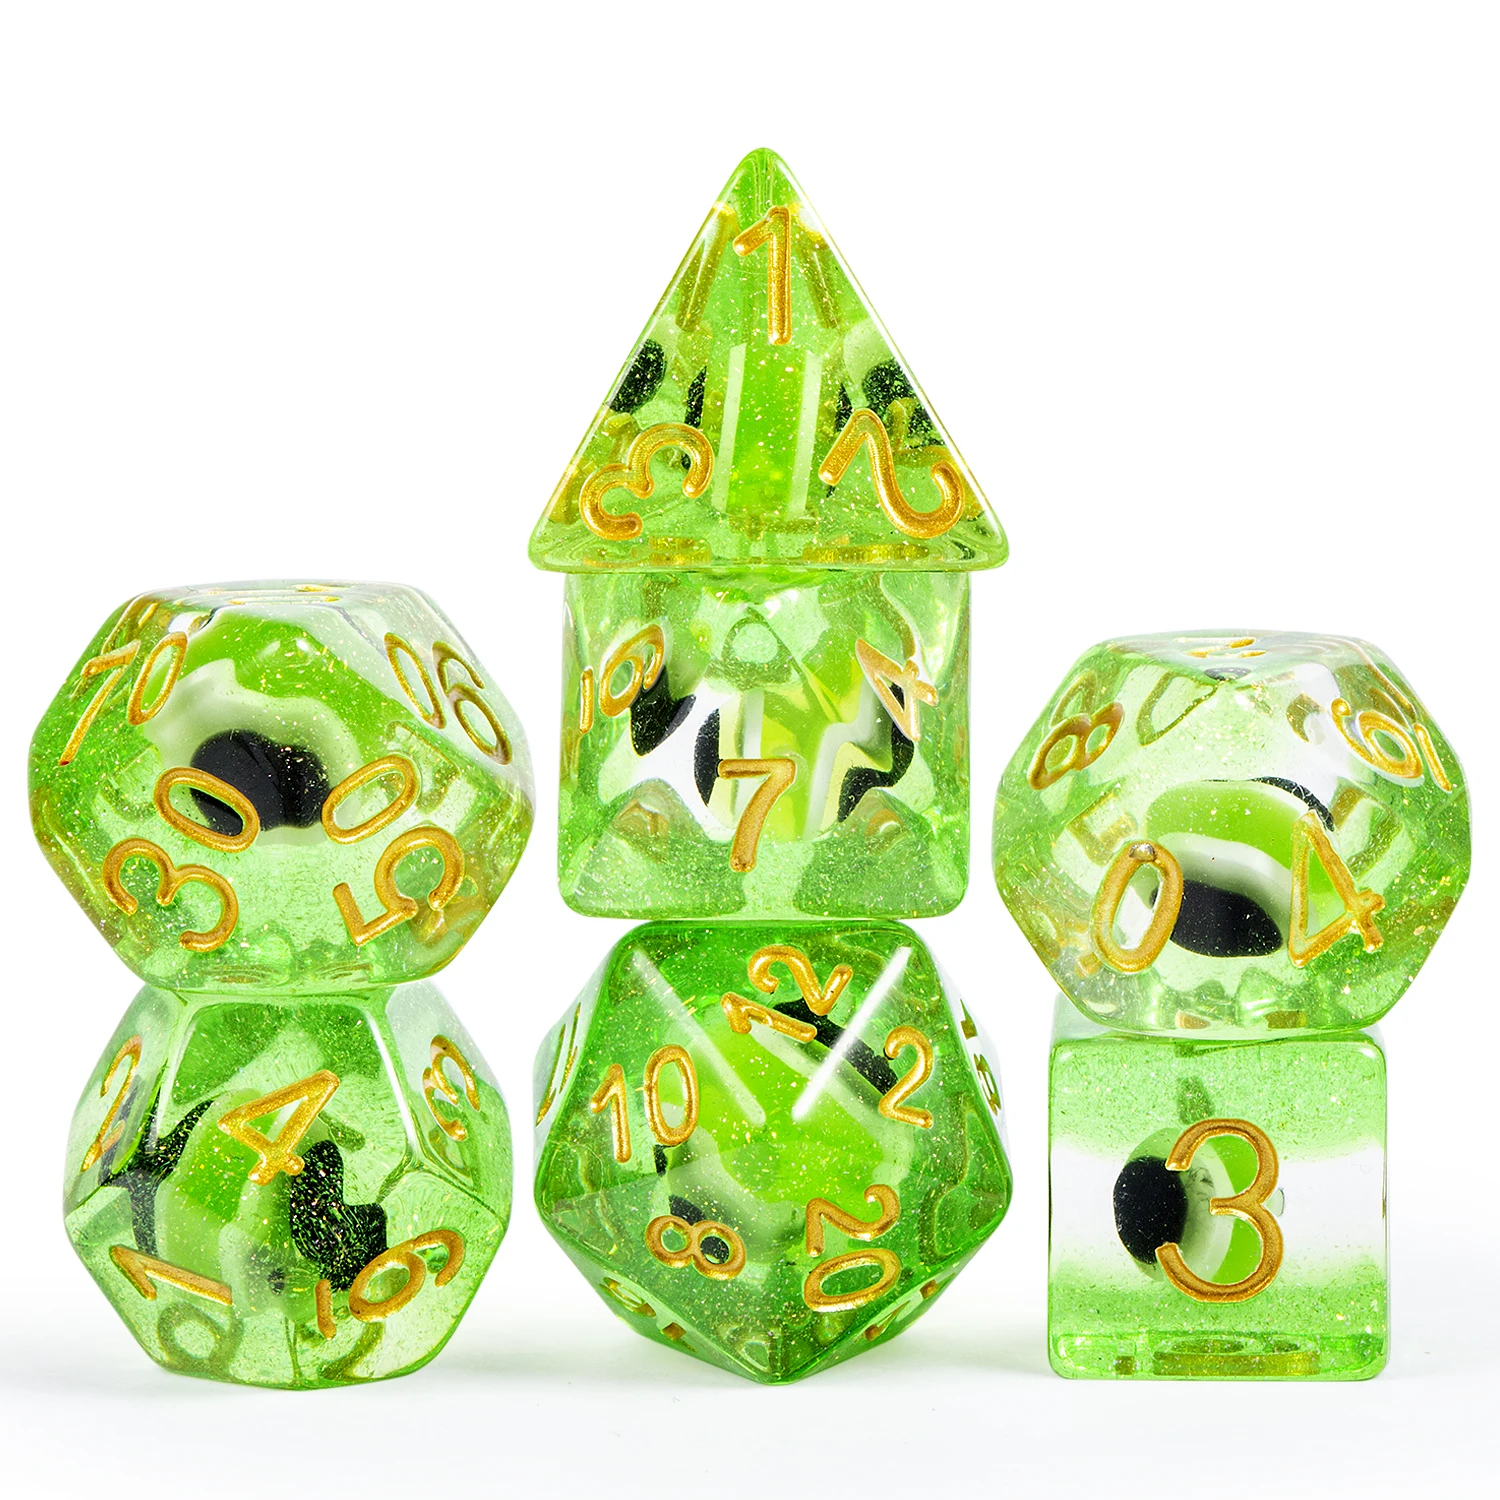 

Factory wholesale Dungeons and Dragons D&D Role Playing Games dice Polyhedral dnd dice resin dice set green